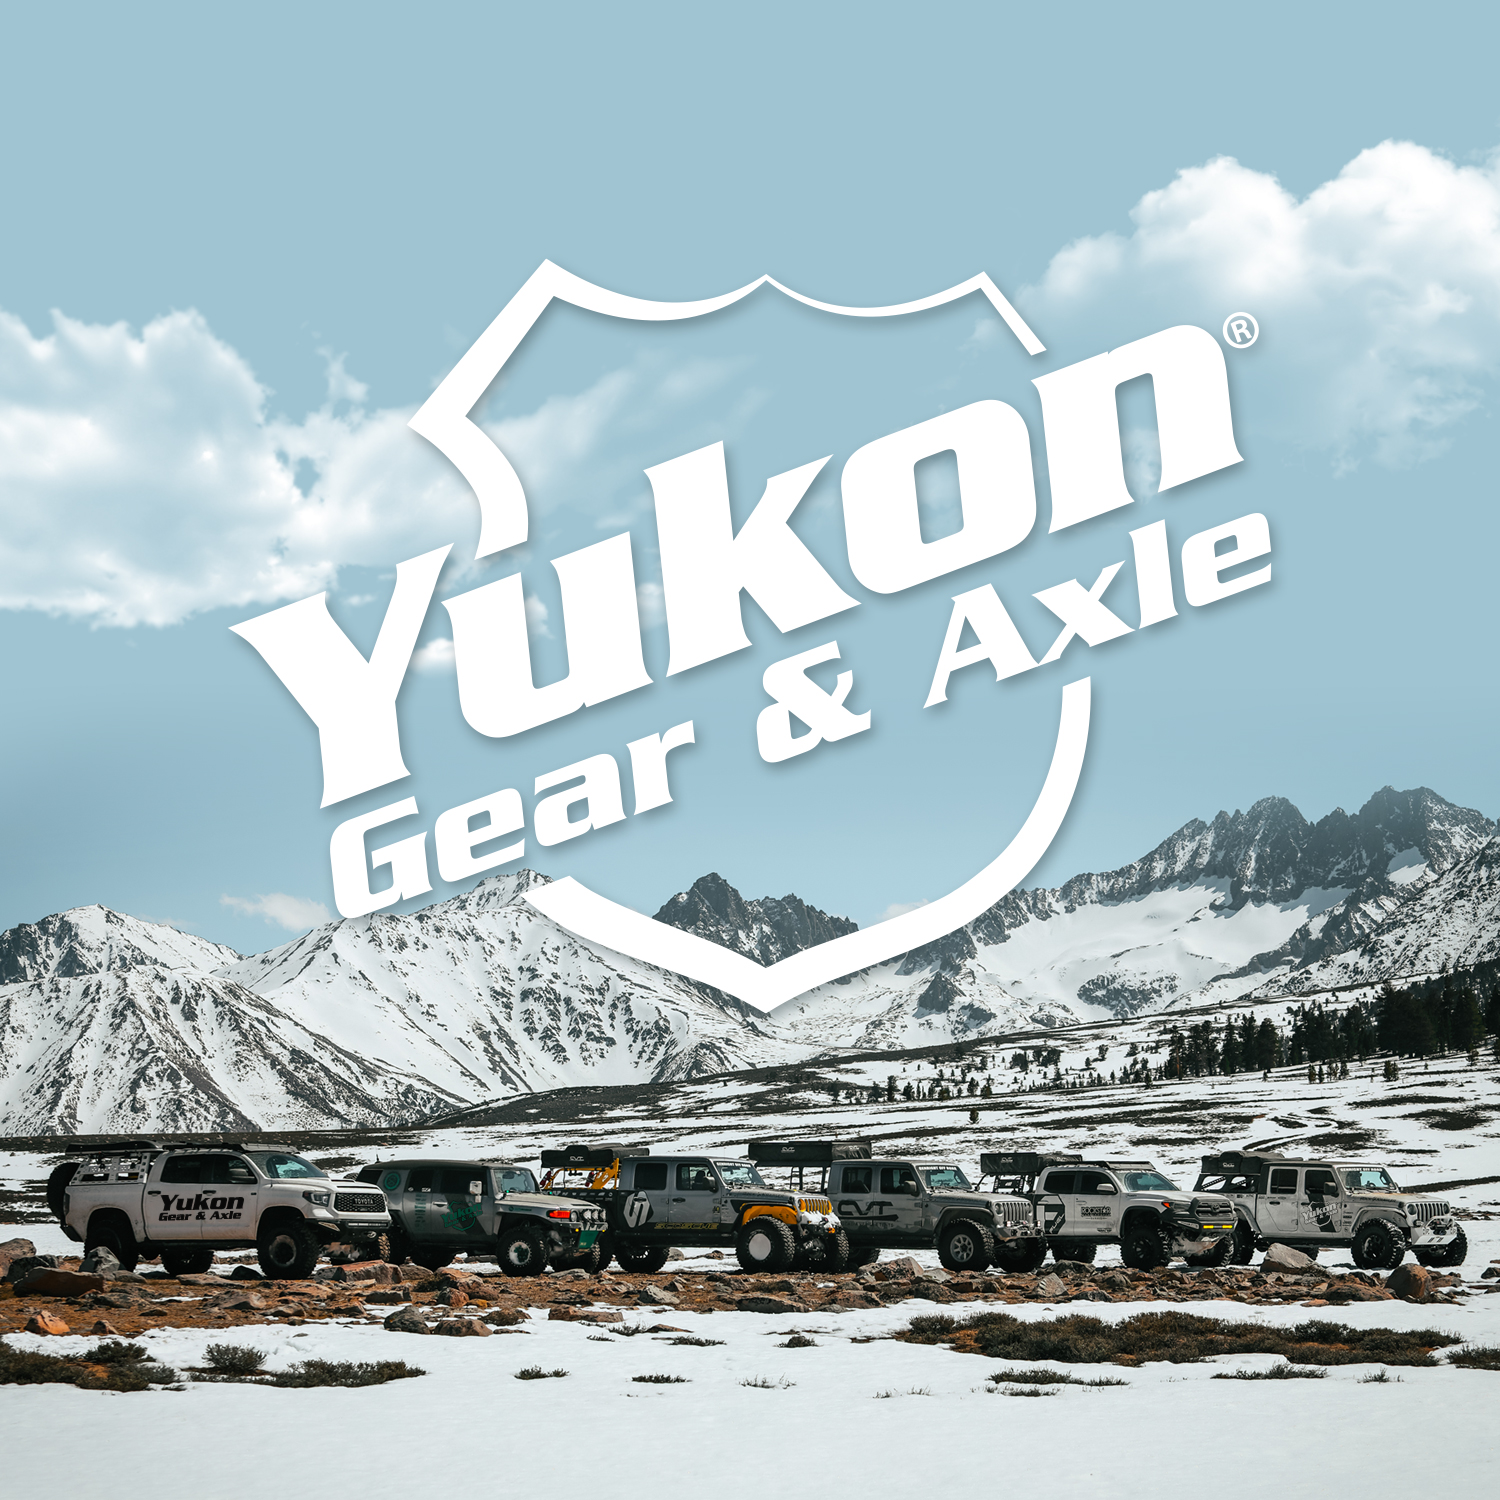 Yukon Bearing install kit for '97-'98 Ford 9.75" differential 